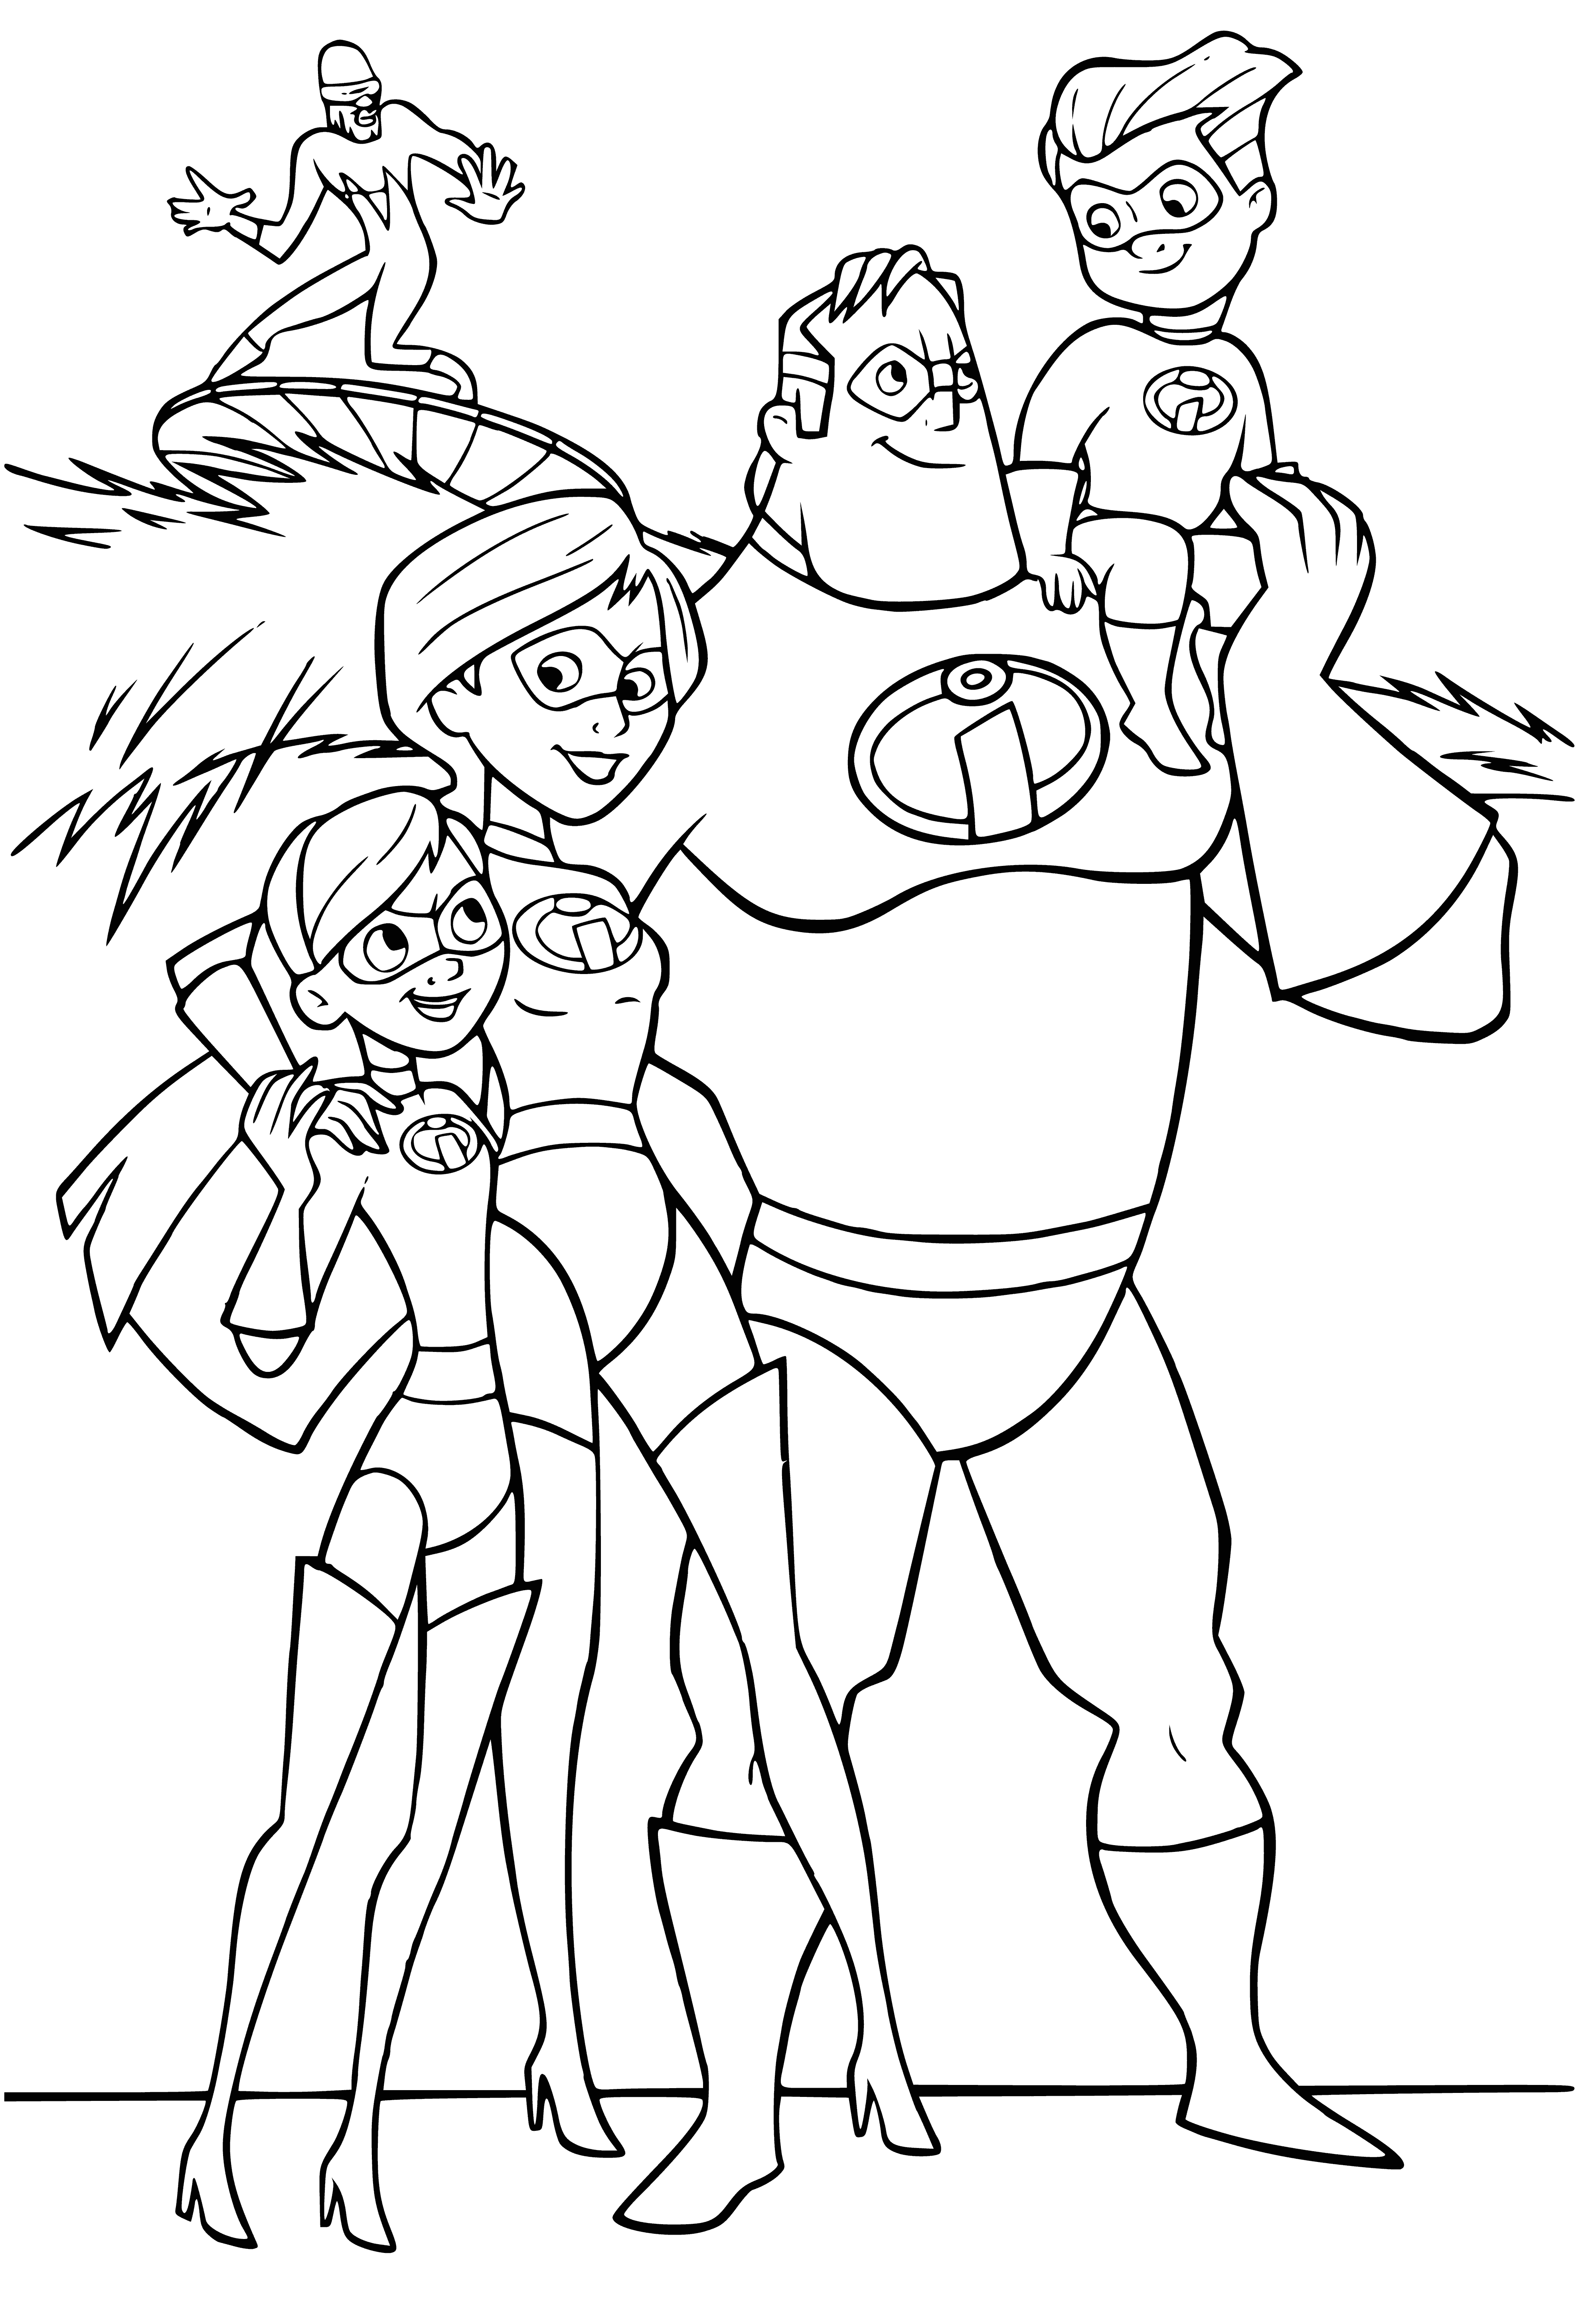 coloring page: Family of superheroes save world from evil; close, always supporting each other. #TheIncredibles